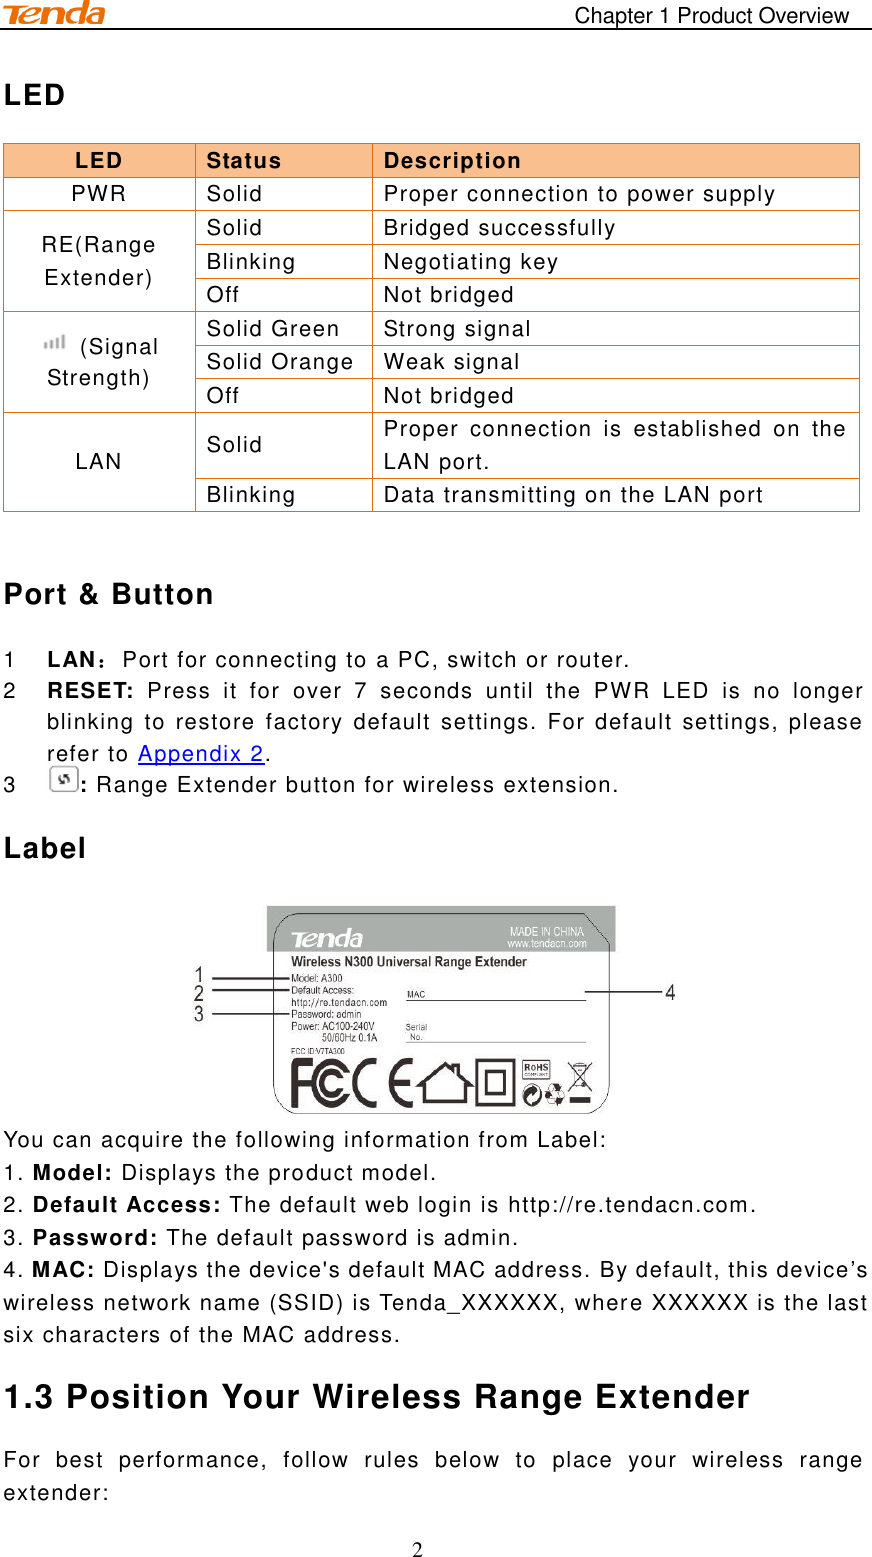                                                                                       Chapter 1 Product Overview 2 LED LED Status   Description PWR Solid   Proper connection to power supply RE(Range Extender) Solid   Bridged successfully Blinking   Negotiating key Off   Not bridged   (Signal Strength) Solid Green Strong signal Solid Orange Weak signal   Off   Not bridged LAN Solid Proper  connection  is  established  on  the LAN port. Blinking   Data transmitting on the LAN port  Port &amp; Button 1  LAN：Port for connecting to a PC, switch or router.   2  RESET:  Press  it  for  over  7  seconds  until  the  PWR  LED  is  no  longer blinking to  restore  factory  default  settings.  For default  settings, please refer to Appendix 2.   3  : Range Extender button for wireless extension.   Label  You can acquire the following information from Label:  1. Model: Displays the product model.   2. Default Access: The default web login is http://re.tendacn.com.   3. Password: The default password is admin.       4. MAC: Displays the device&apos;s default MAC address. By default, this device’s wireless network name (SSID) is Tenda_XXXXXX, where XXXXXX is the last six characters of the MAC address.   1.3 Position Your Wireless Range Extender For  best  performance,  follow  rules  below  to  place  your  wireless  range extender: 